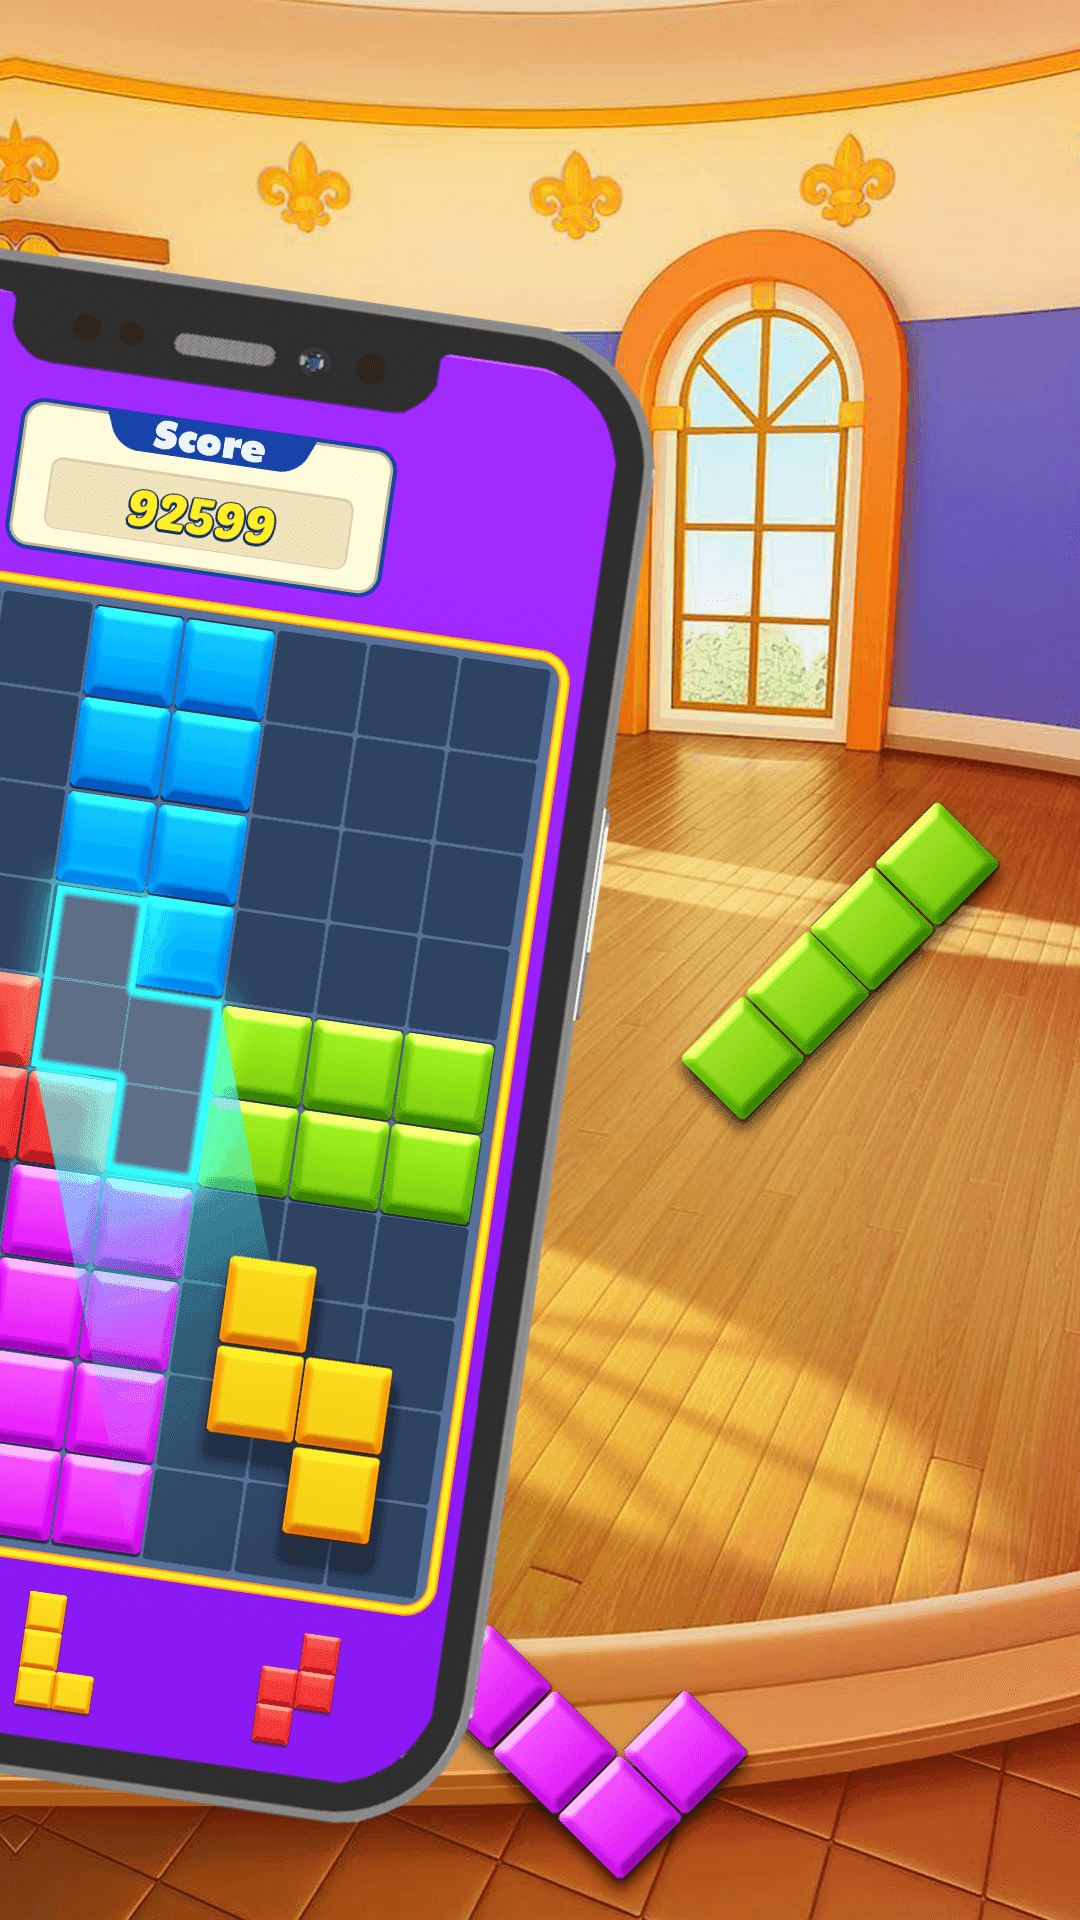 Classic Block Puzzle Game APK for Android Download